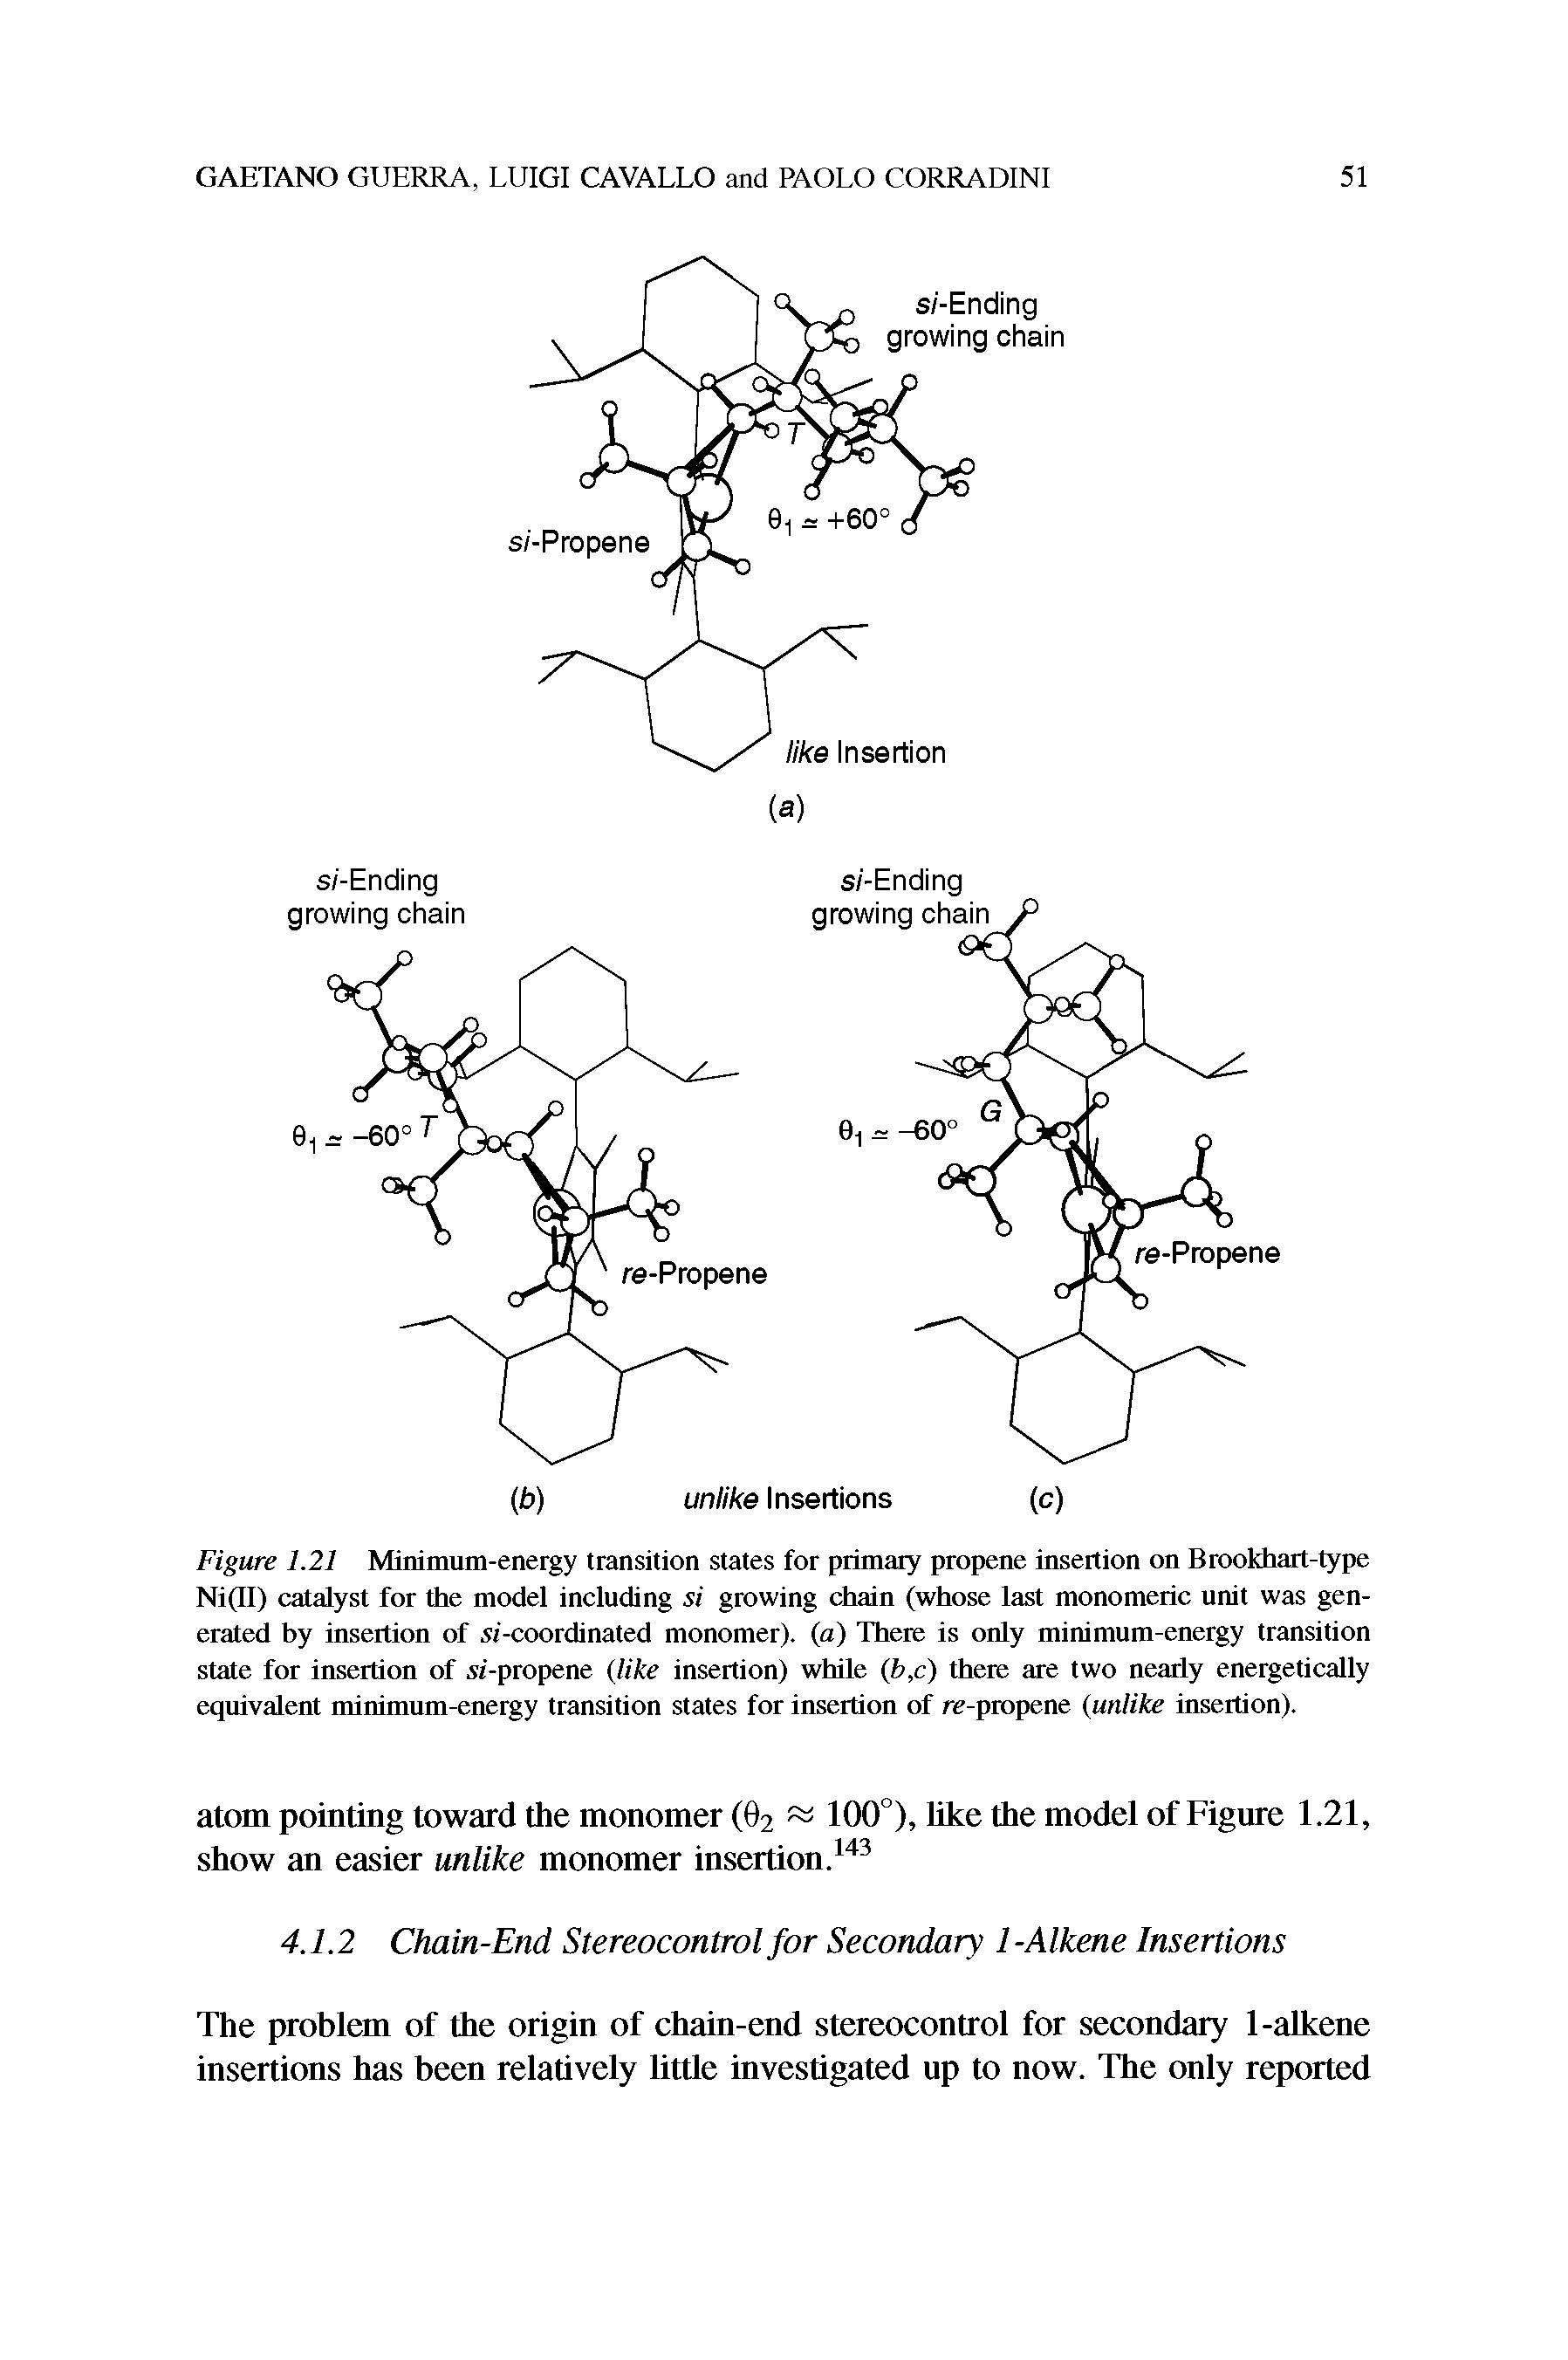 Figure 1.21 Minimum-energy transition states for primary propene insertion on Brookhart-type Ni(II) catalyst for the model including si growing chain (whose last monomeric unit was generated by insertion of -coordinated monomer), (a) There is only minimum-energy transition state for insertion of, v(-propene (like insertion) while (b,c) there are two nearly energetically equivalent minimum-energy transition states for insertion of re-propene (unlike insertion).